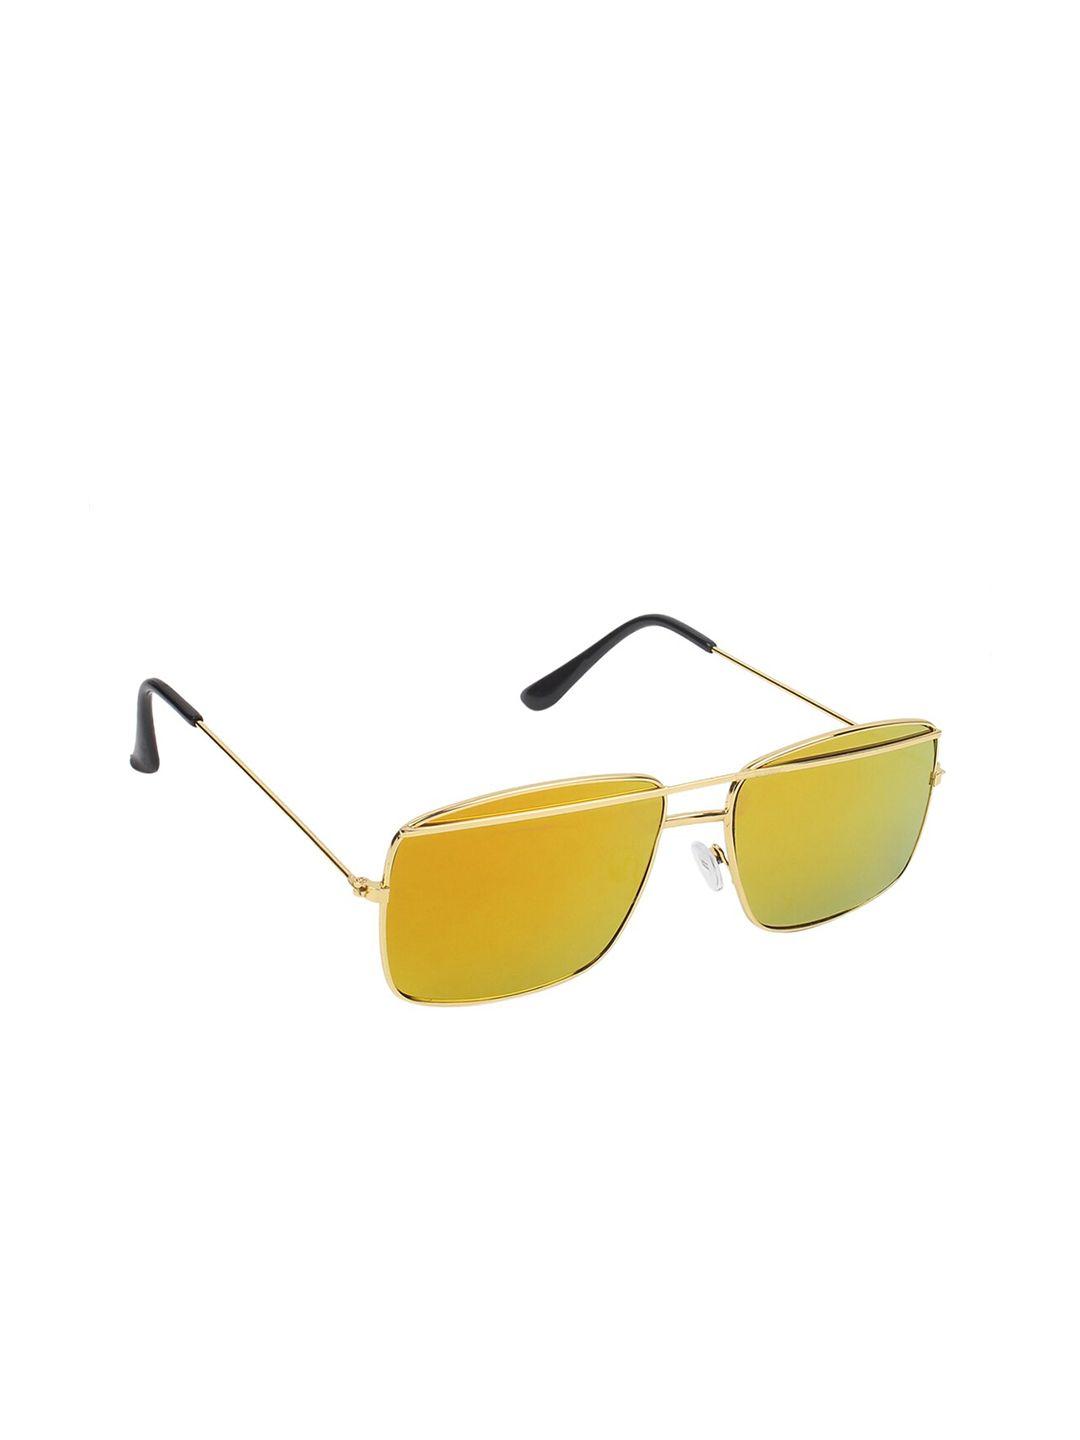 swiss design unisex mirrored lens & gold-toned rectangle sunglasses with uv protected lens